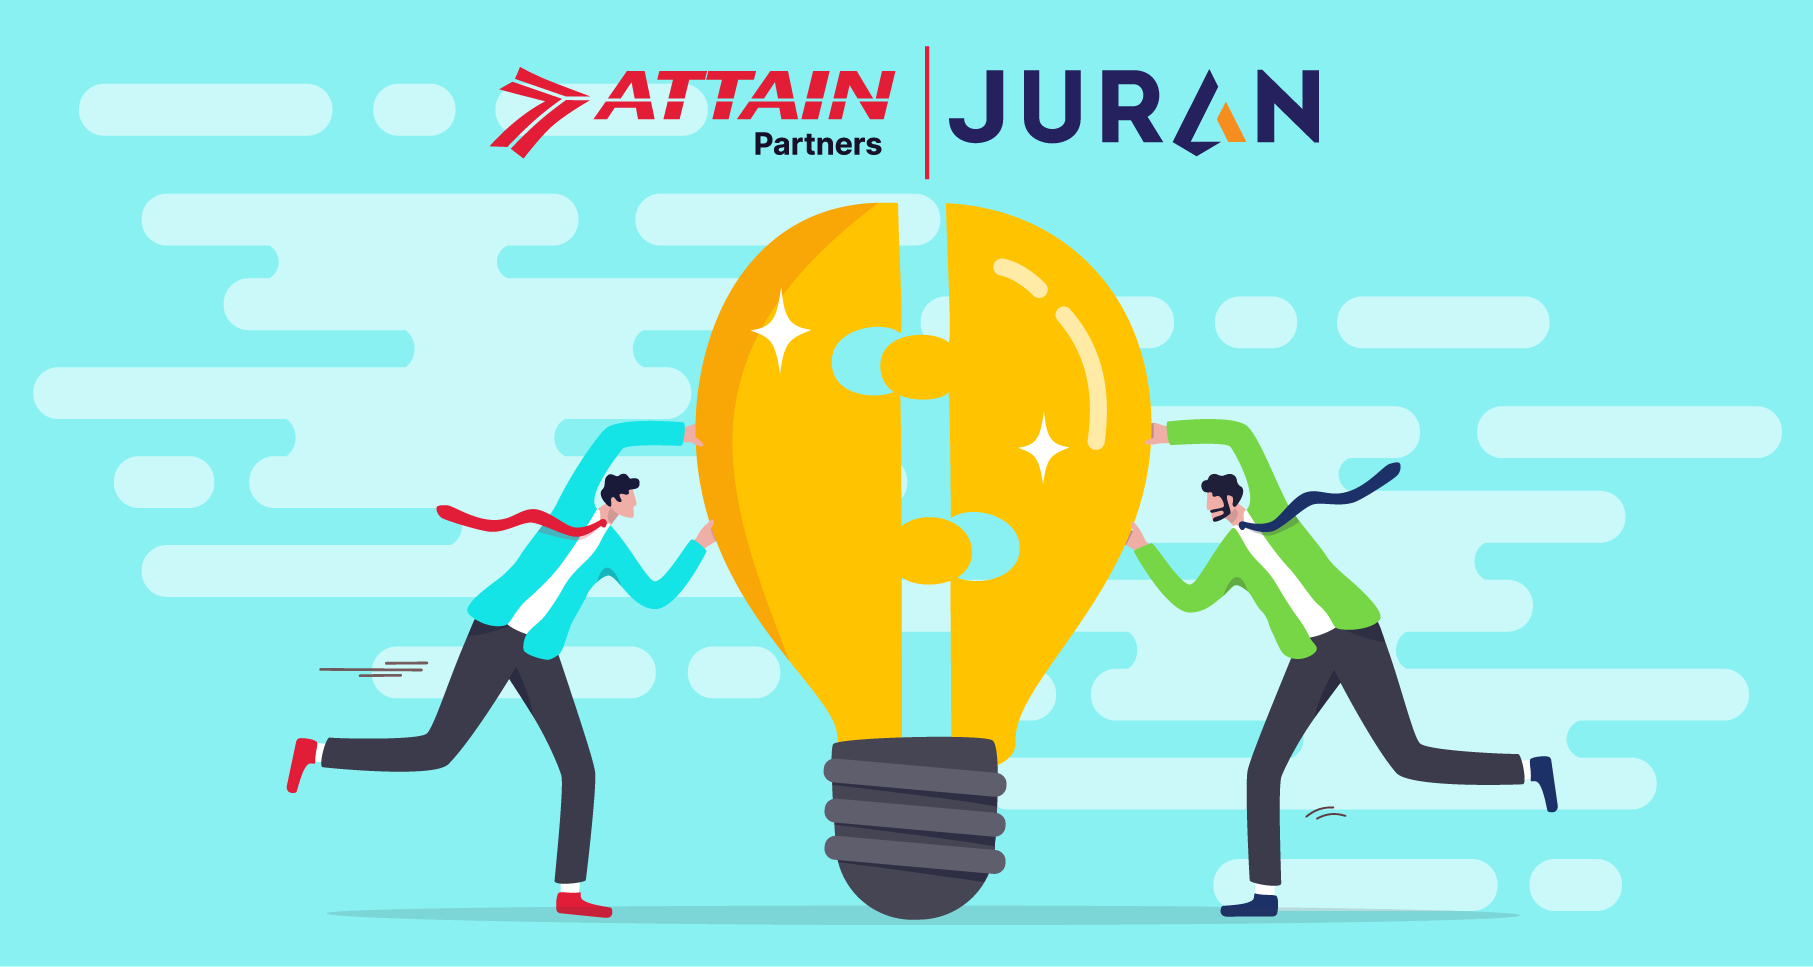 Two people joining large light bulb puzzle pieces with Attain Partners and Juran logos above